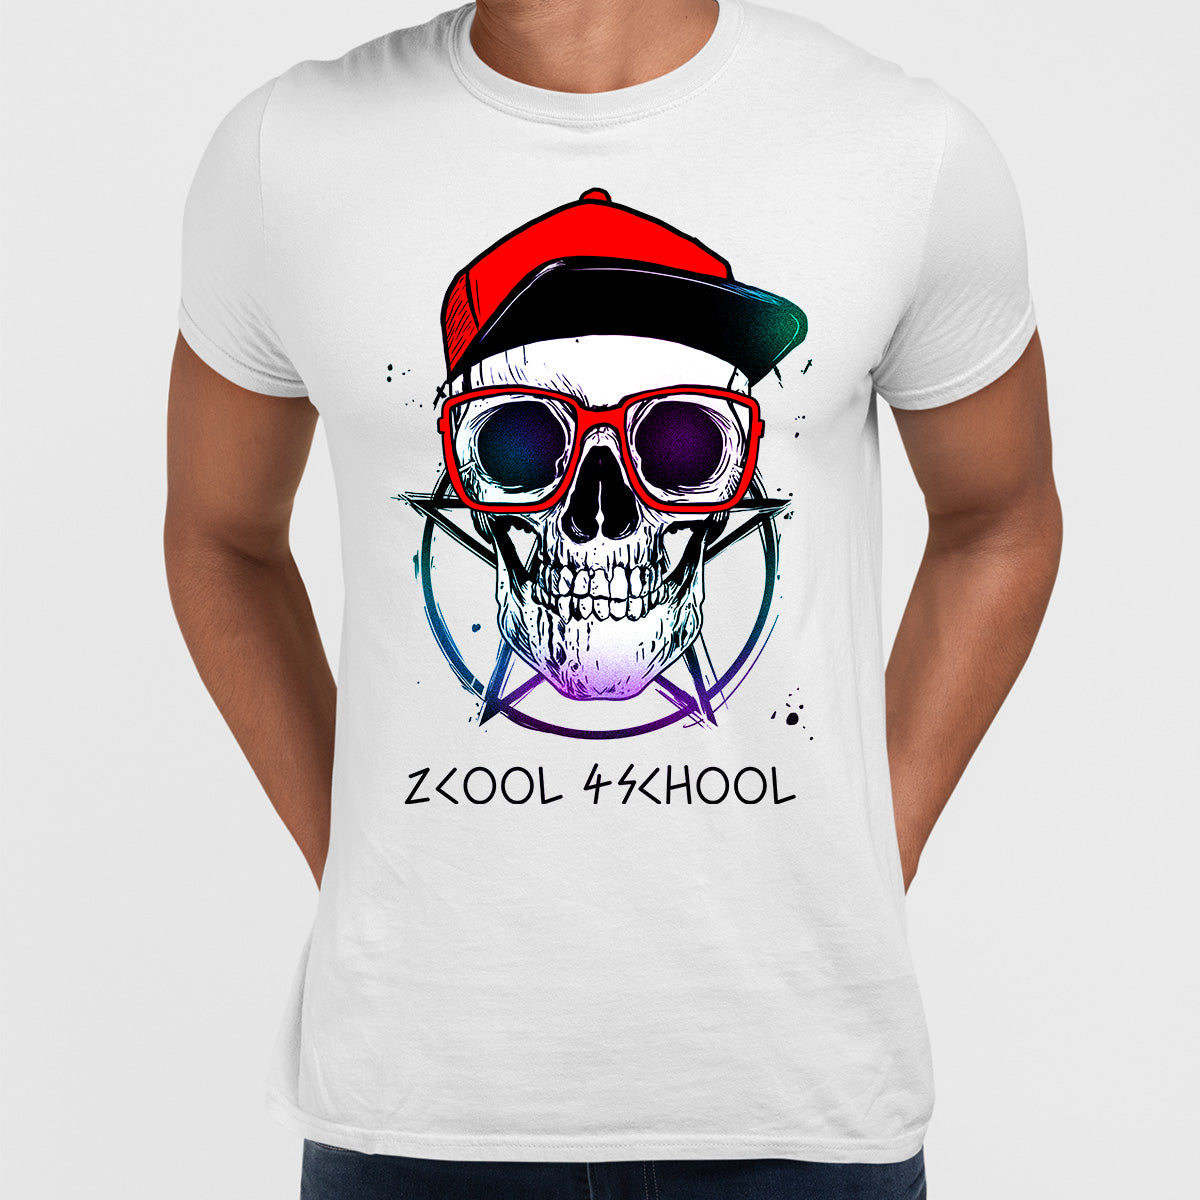 Old Skull With Glasses and Pentagram T-shirts with an Attitude For men and women - Kuzi Tees